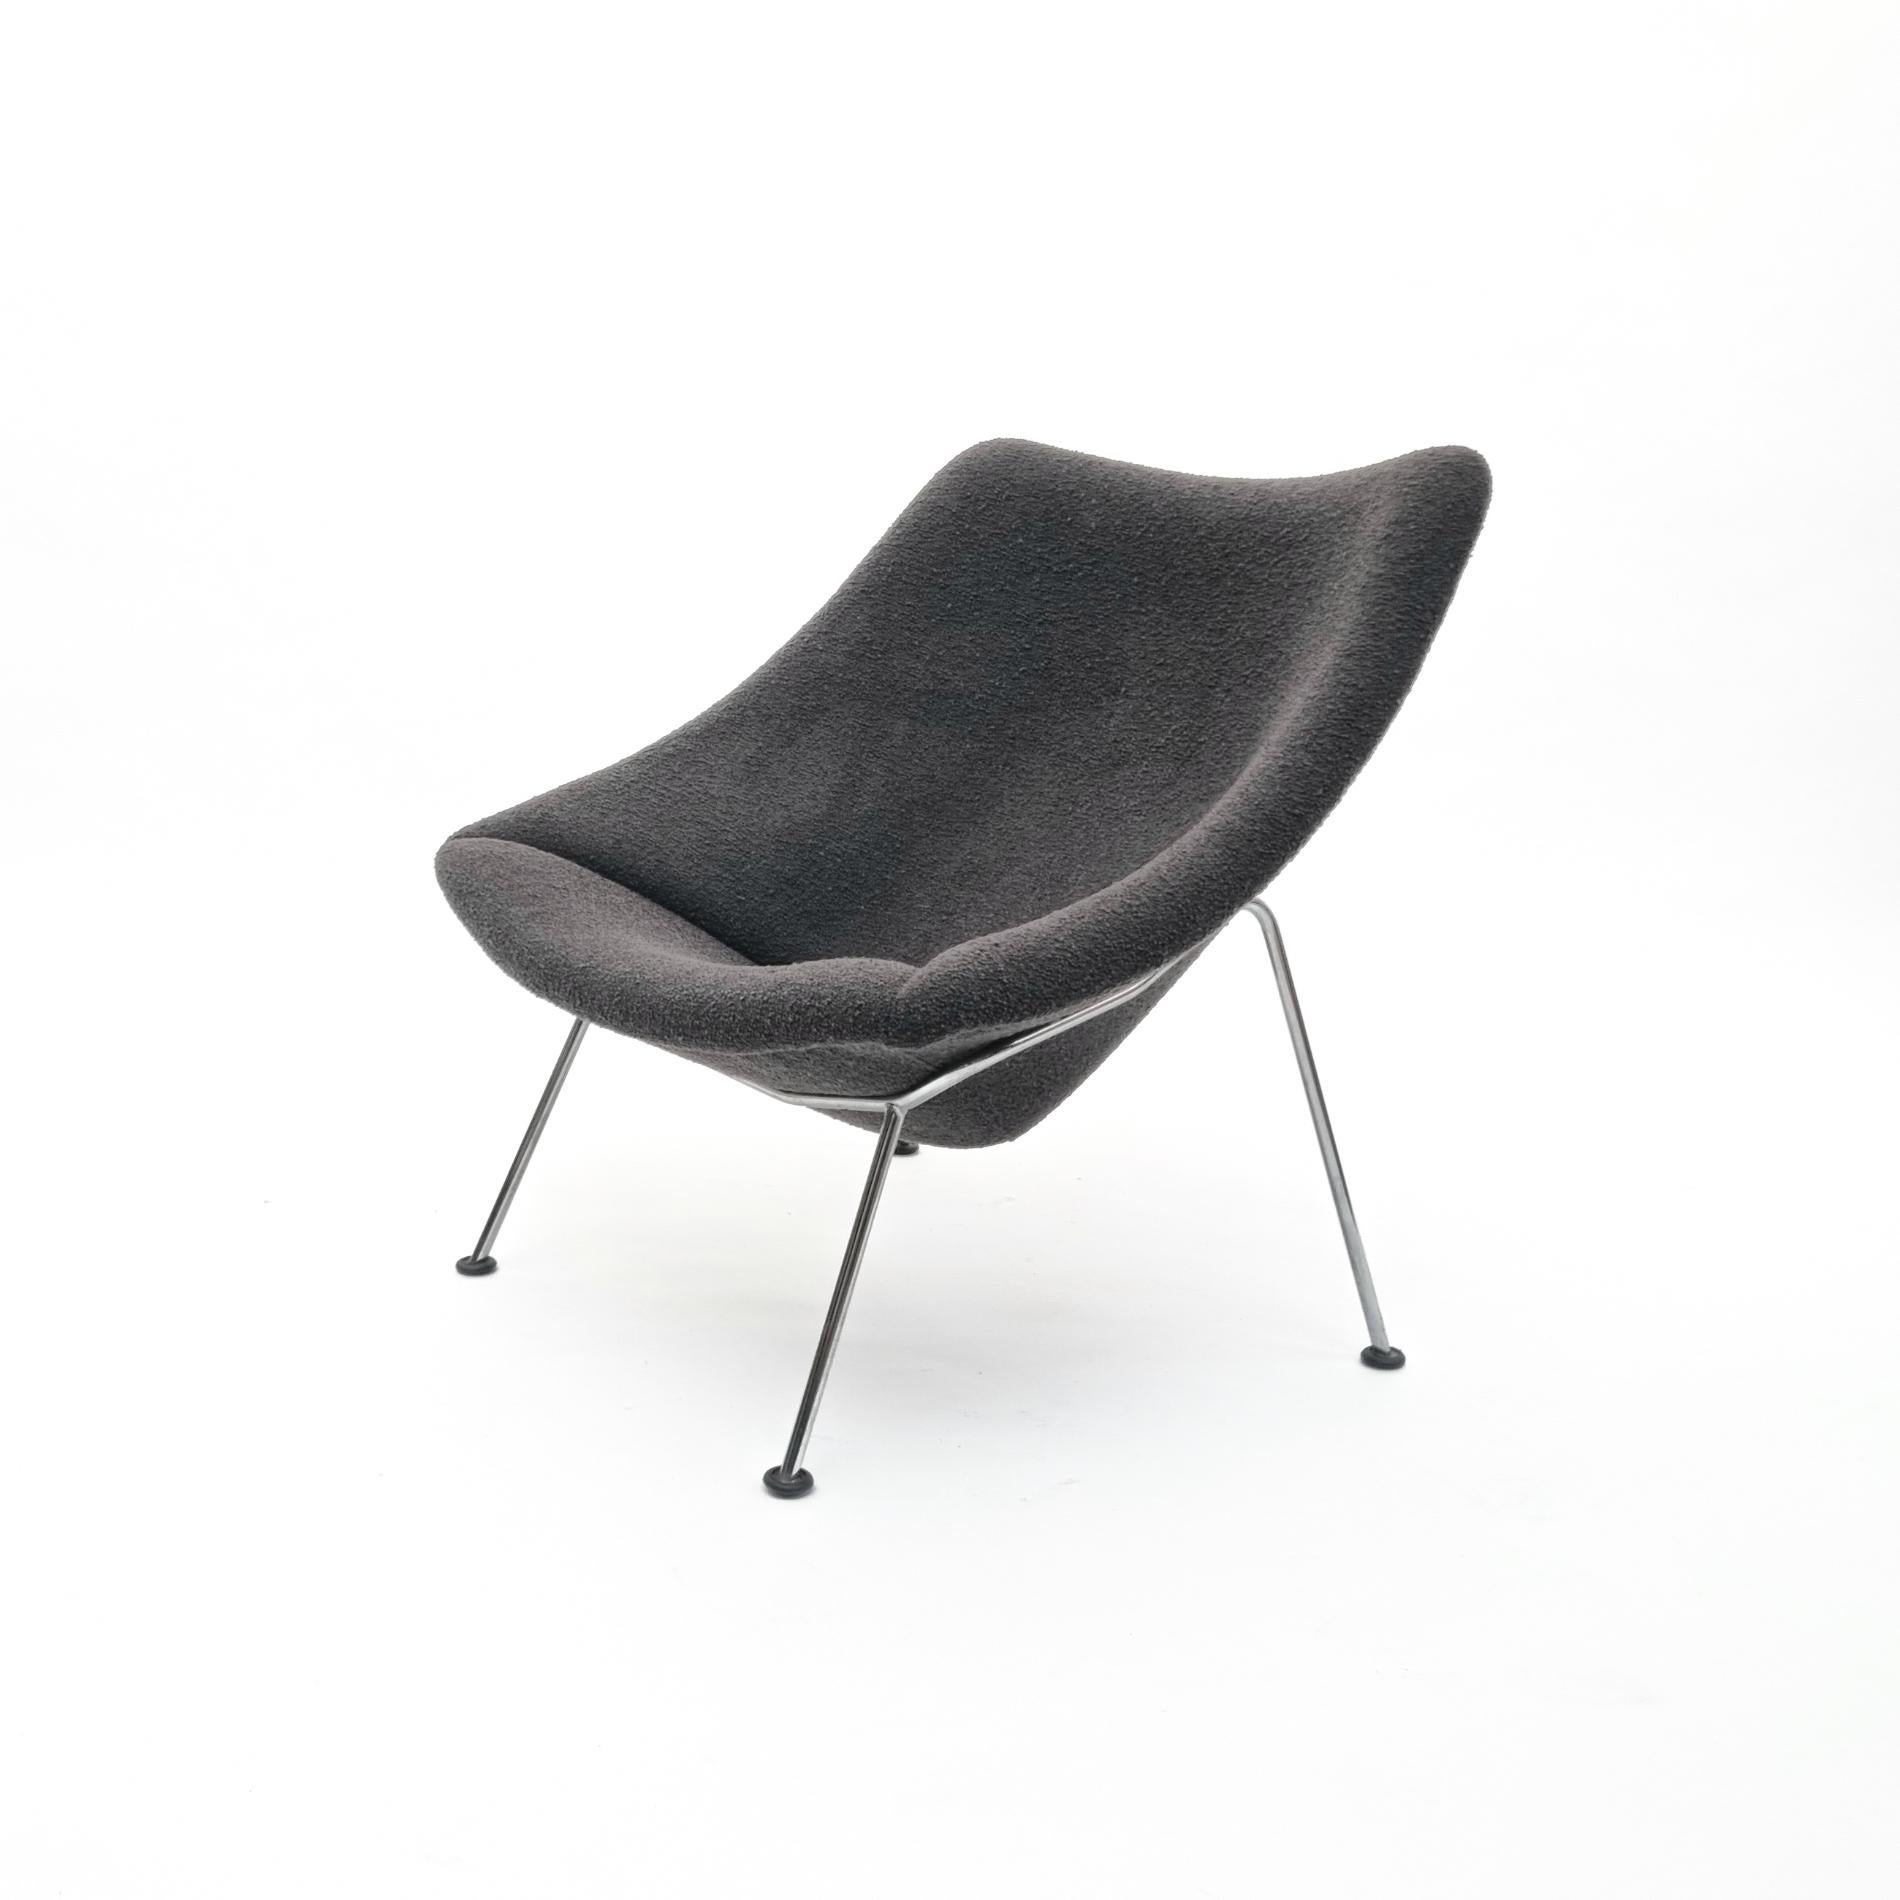 Oyster lounge chair by Pierre Paulin for Artifort. Shell covered with foam and upholstered in a dark grey De Ploeg fabric. Base made of nickel-plated steel rods. Original condition! Fits perfectly in a contemporary interior.